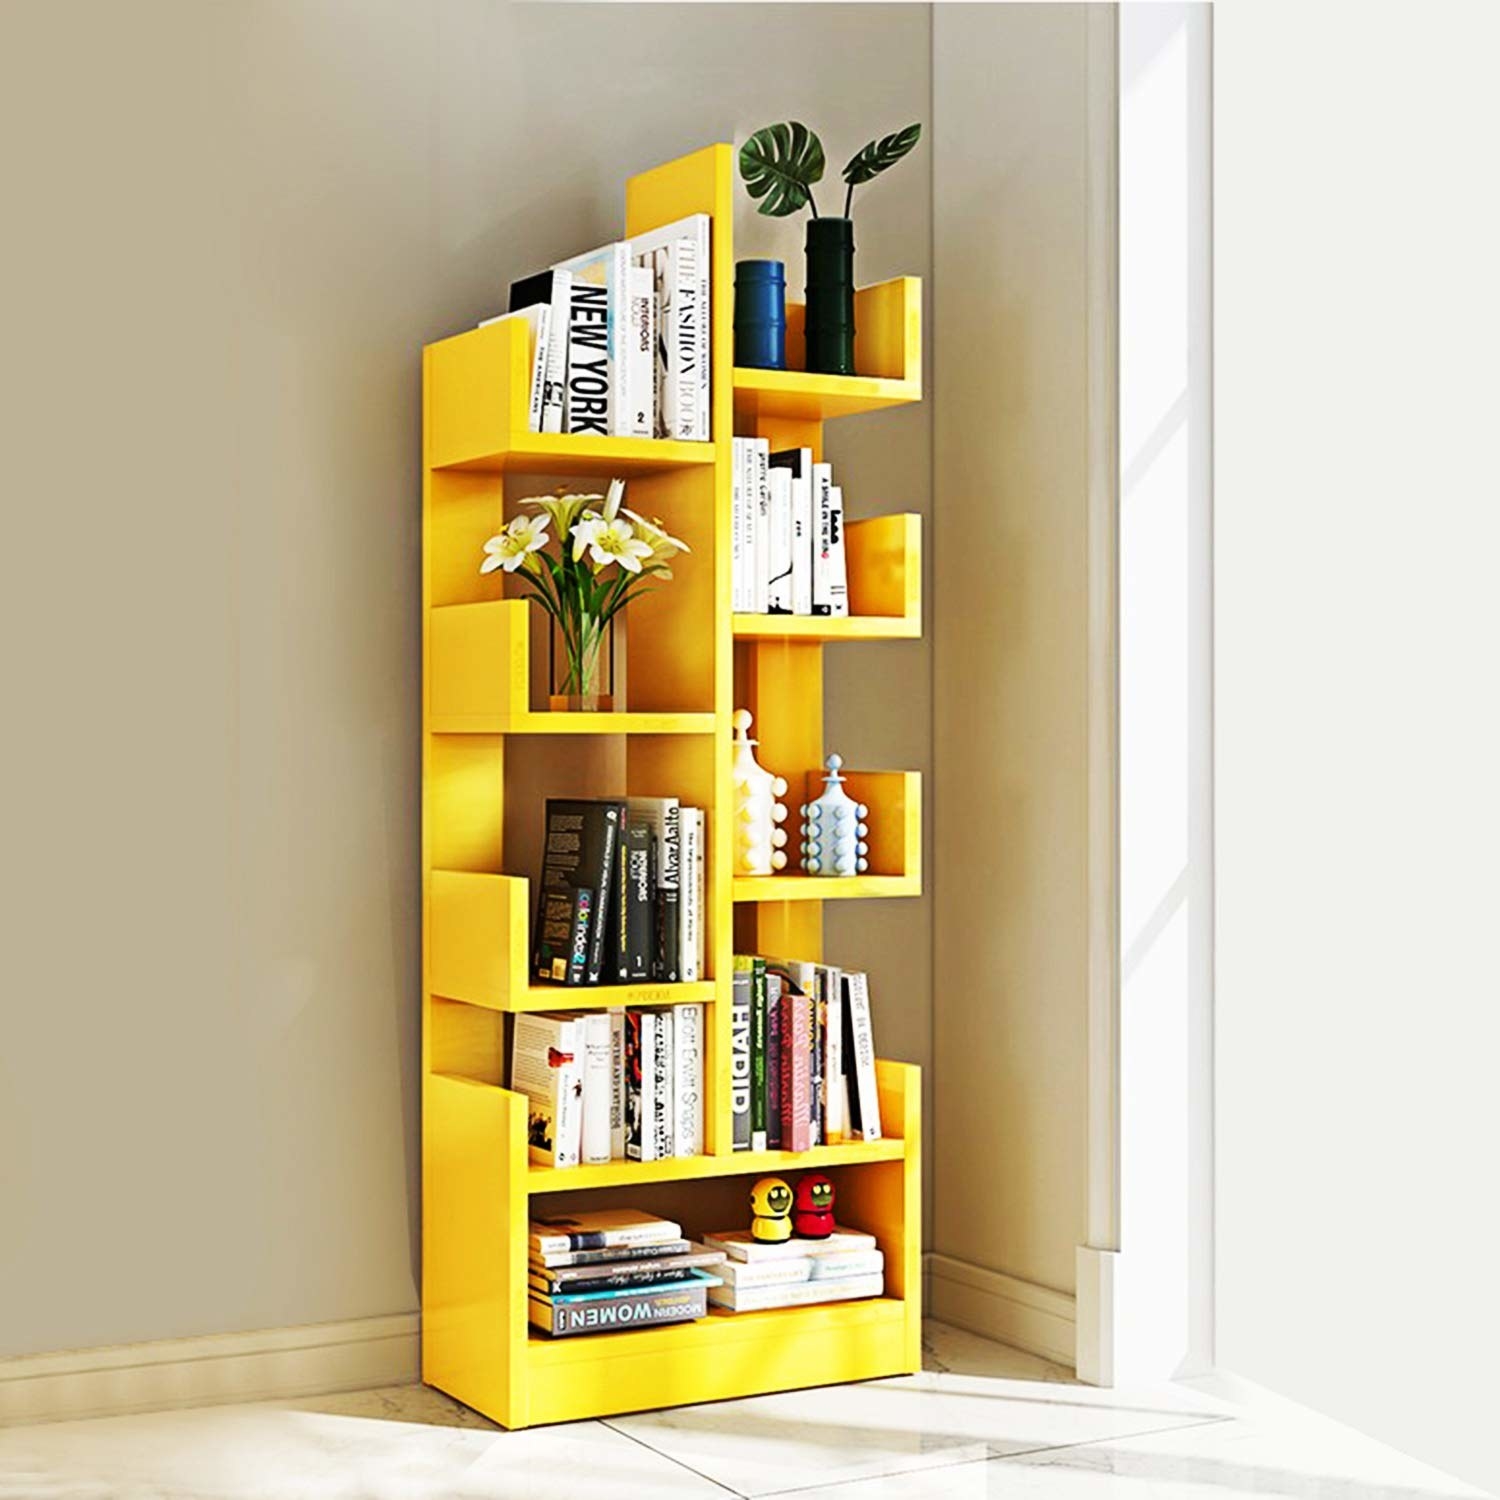 A yellow bookshelf with books in it